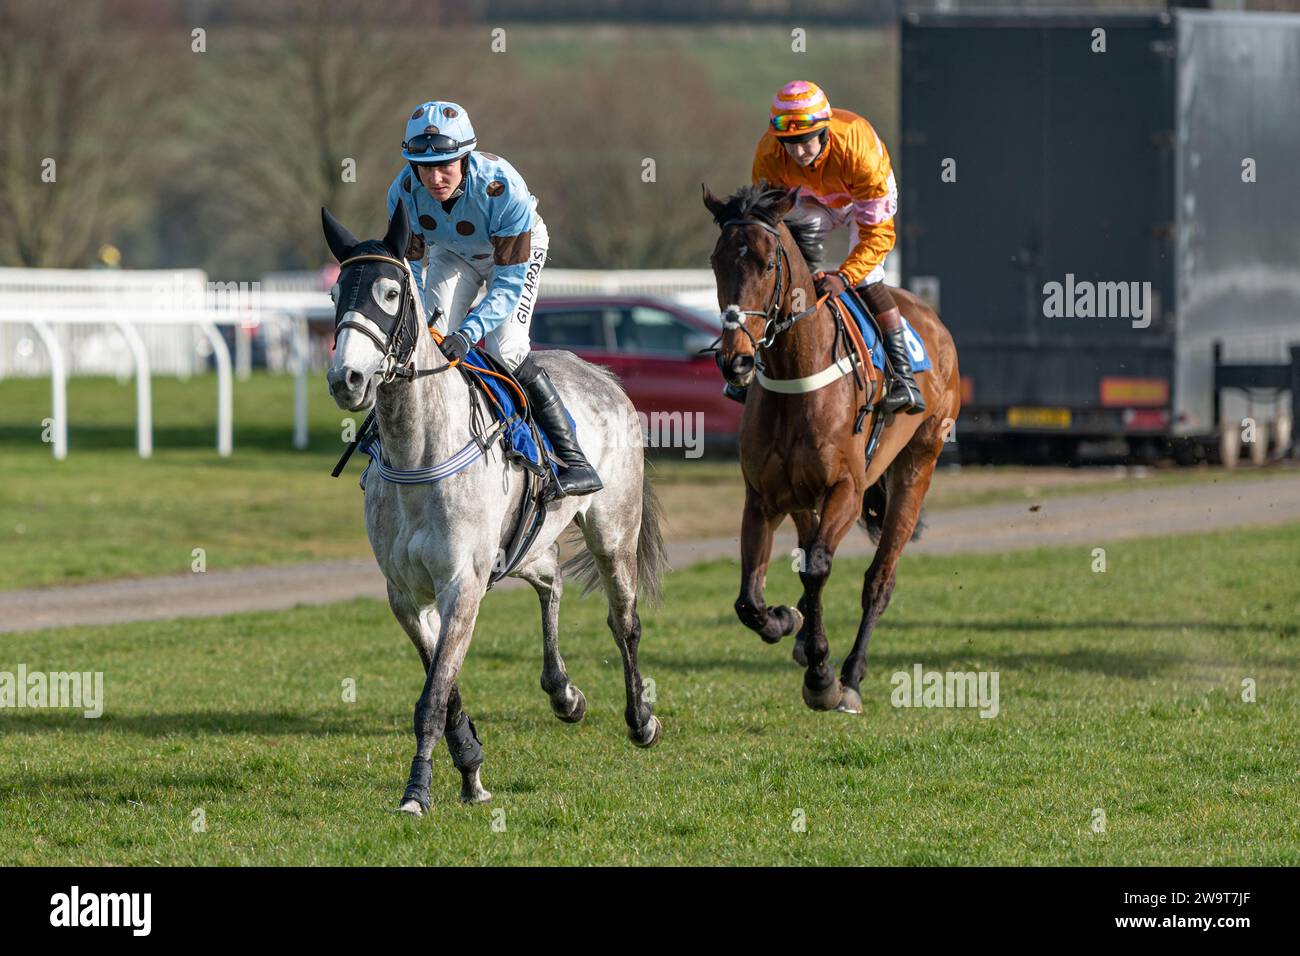 What a Pleasure, ridden by David Noonan, followed by Name in Lights, ridden by Brendan Powell, canter to the start of race 4 at Wincanton Stock Photo